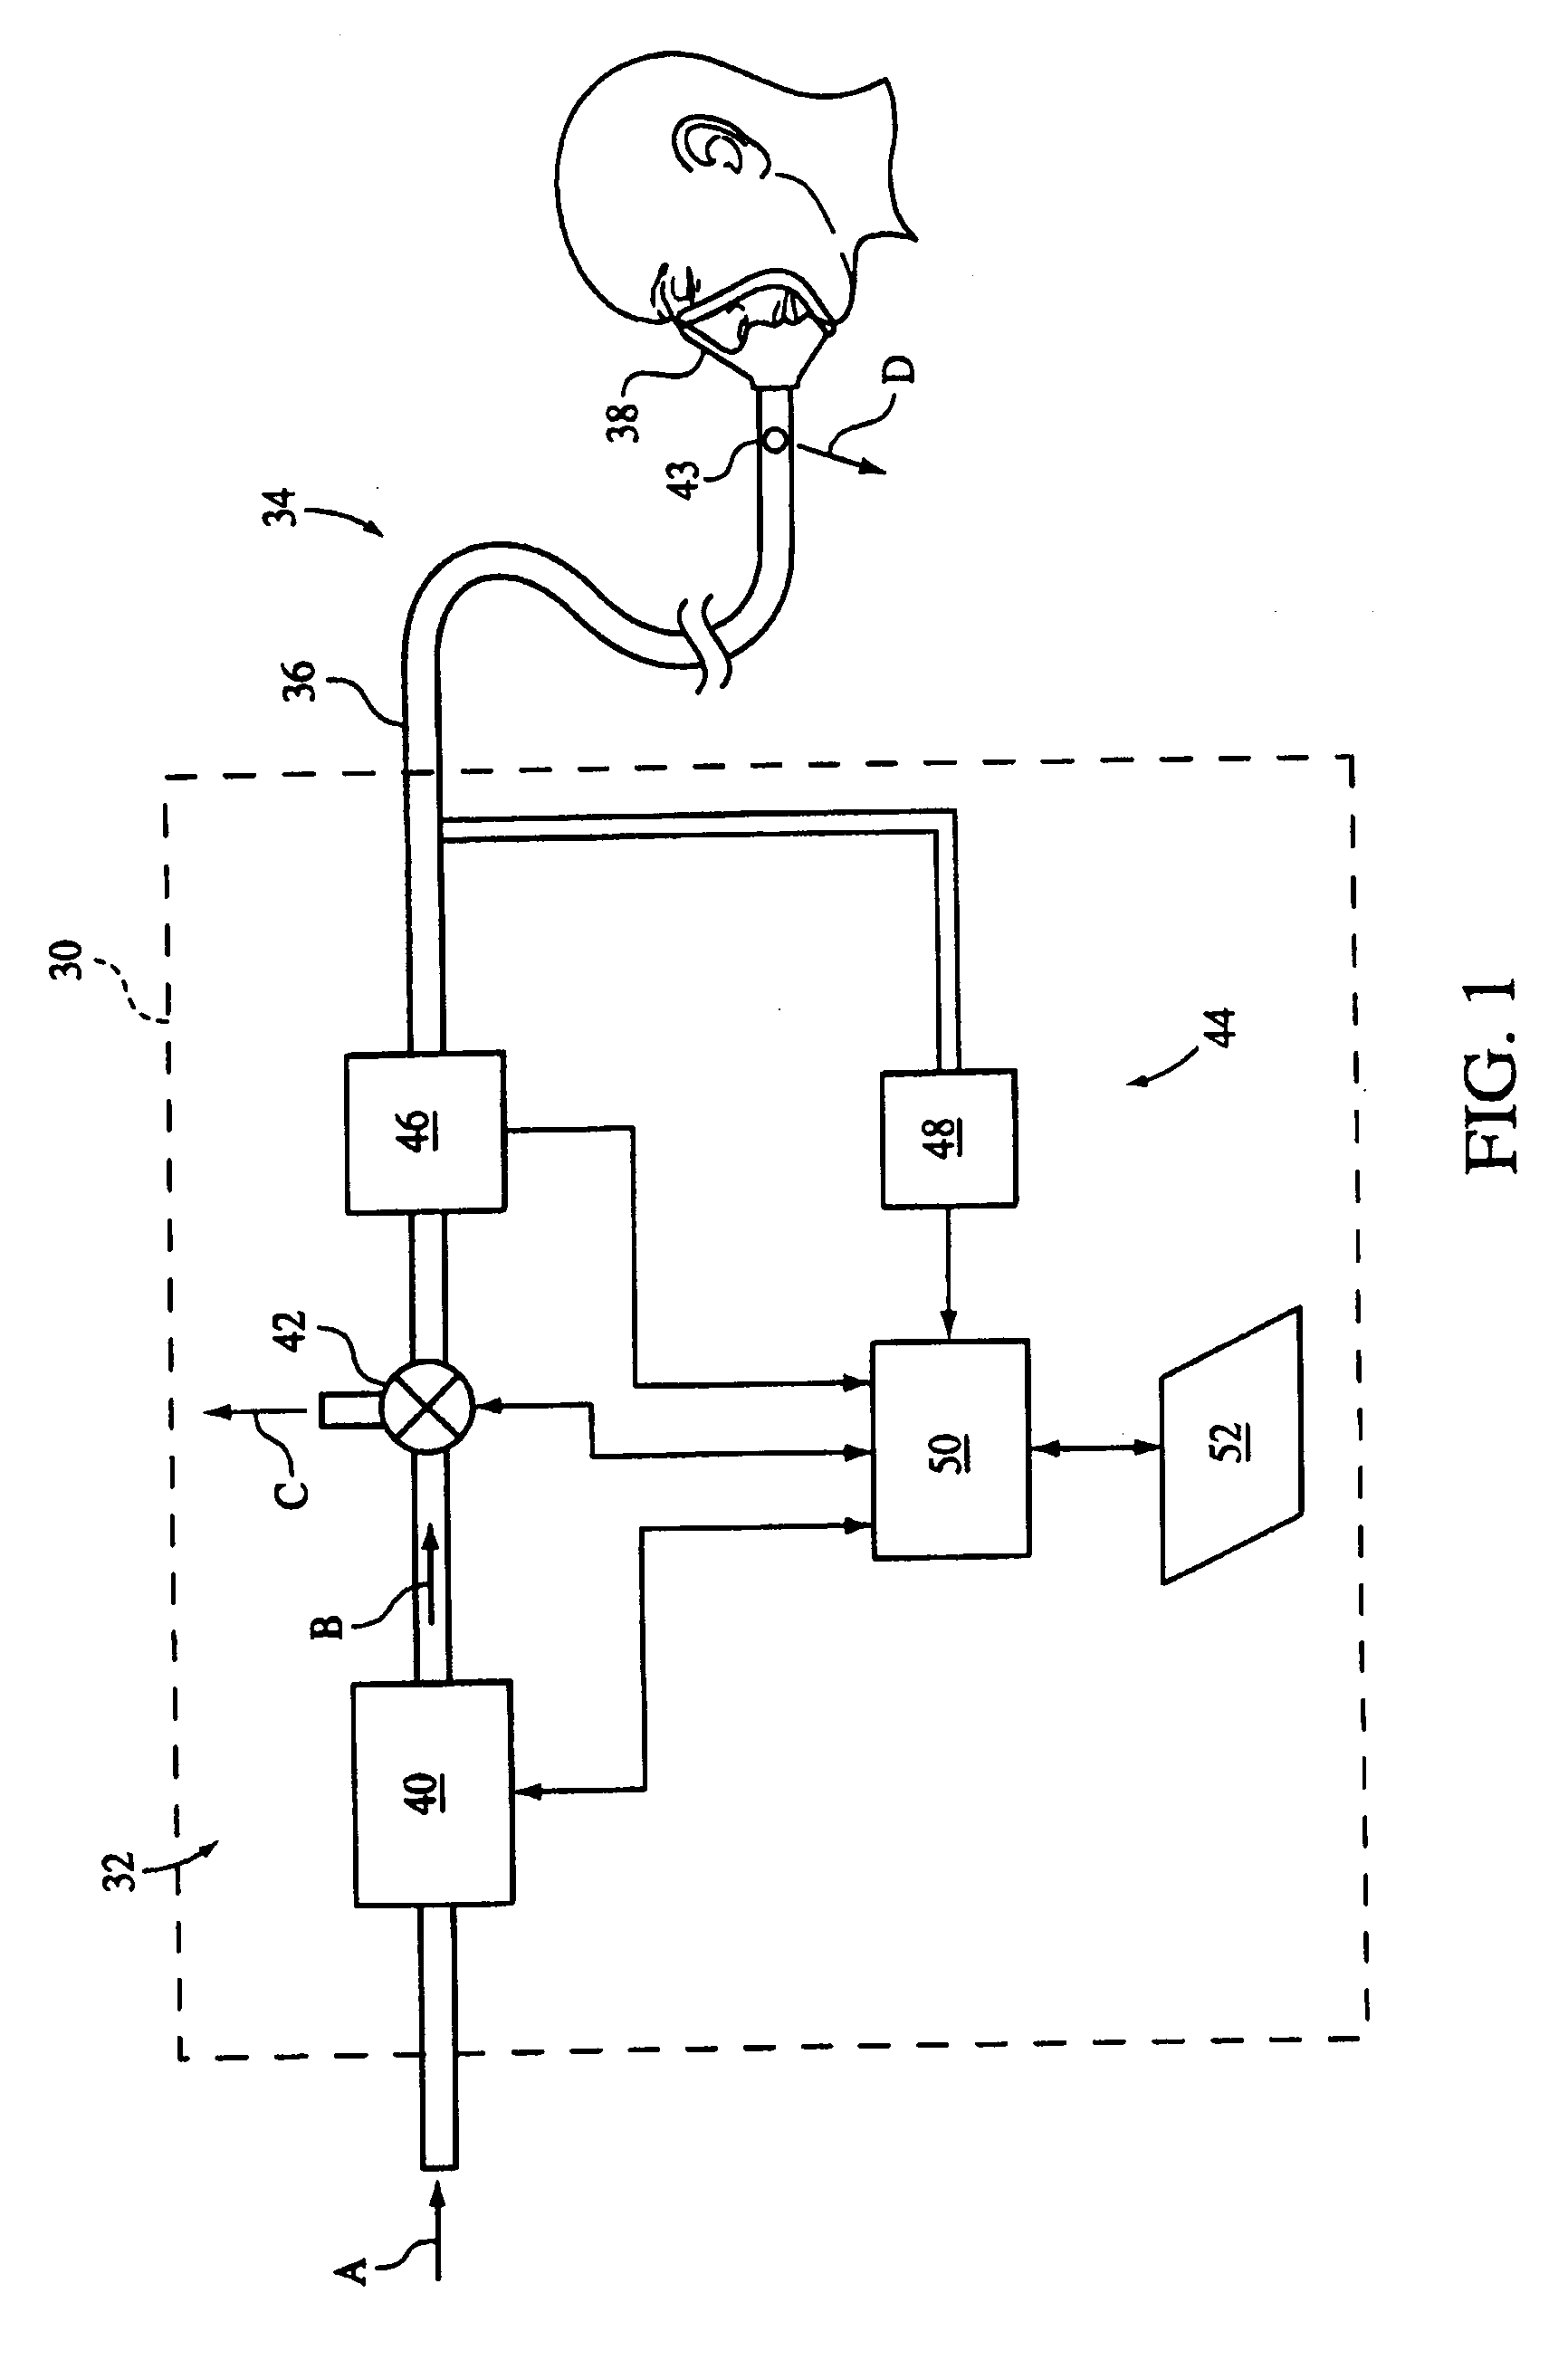 Auto-Titration Bi-Level Pressure Support System and Method of Using Same